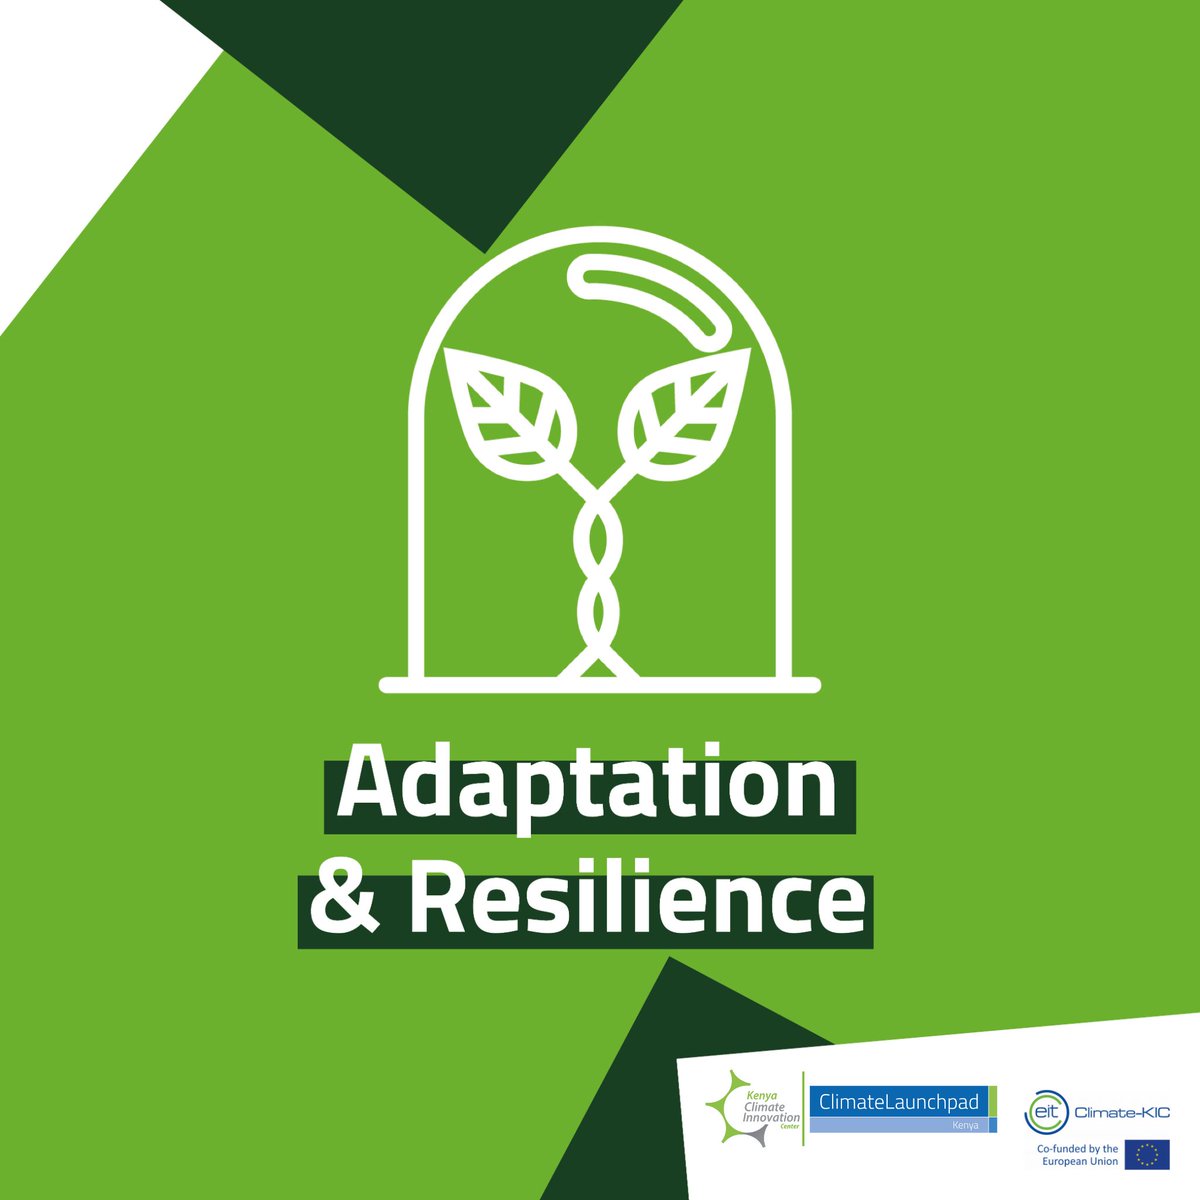 Climate change creates worldwide challenges. Some regions, communities, and ecosystems are particularly vulnerable to climate volatility. That’s why Adaptation & Resilience is one of our 8 themes in the #ClimateLaunchpad competition. This theme focuses on ideas that provide